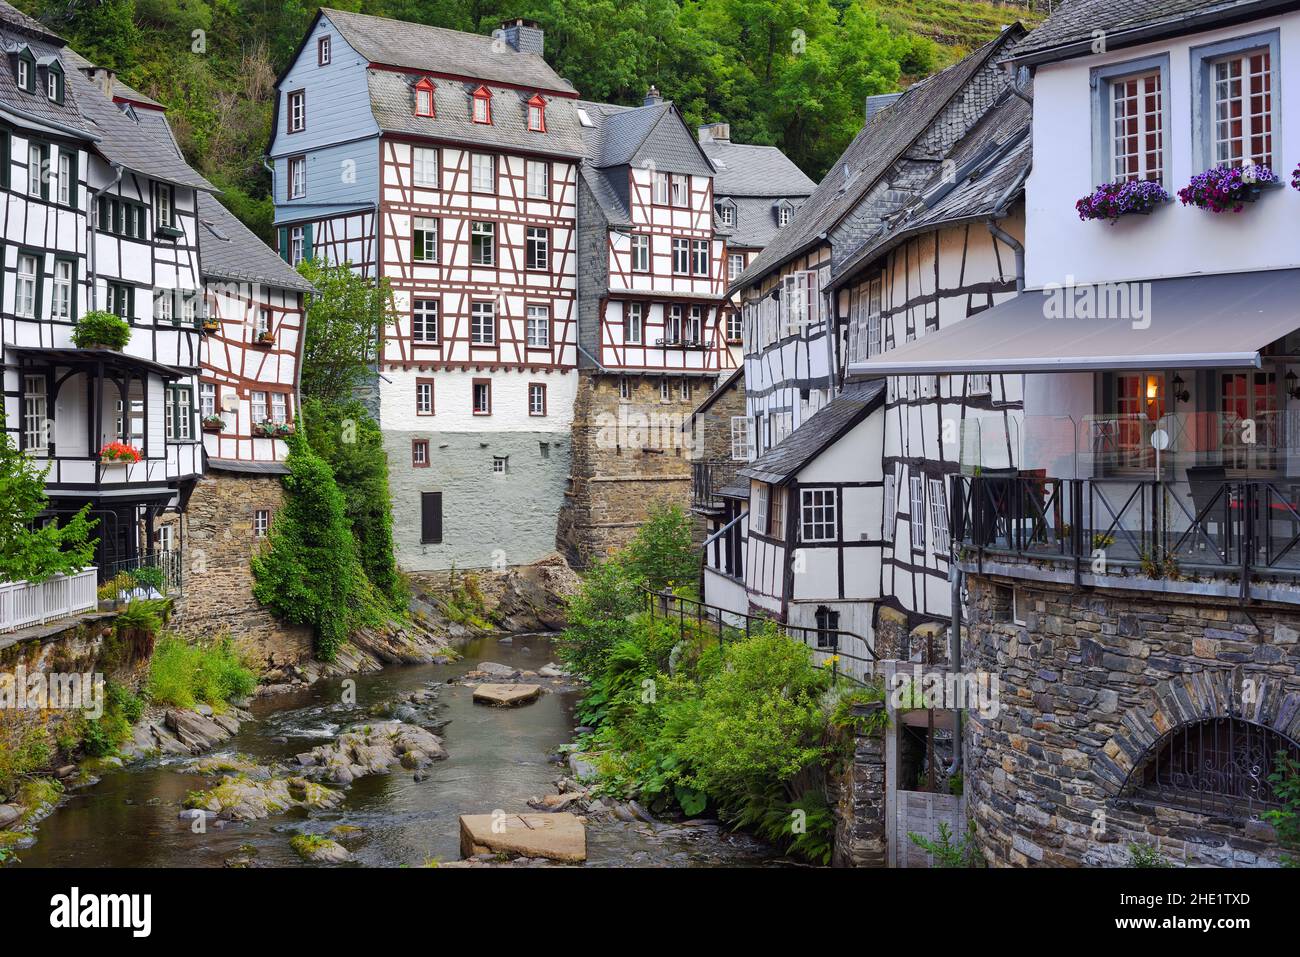 Historical white half-timbered houses in Monschau Old town, Eifel region, Germany Stock Photo